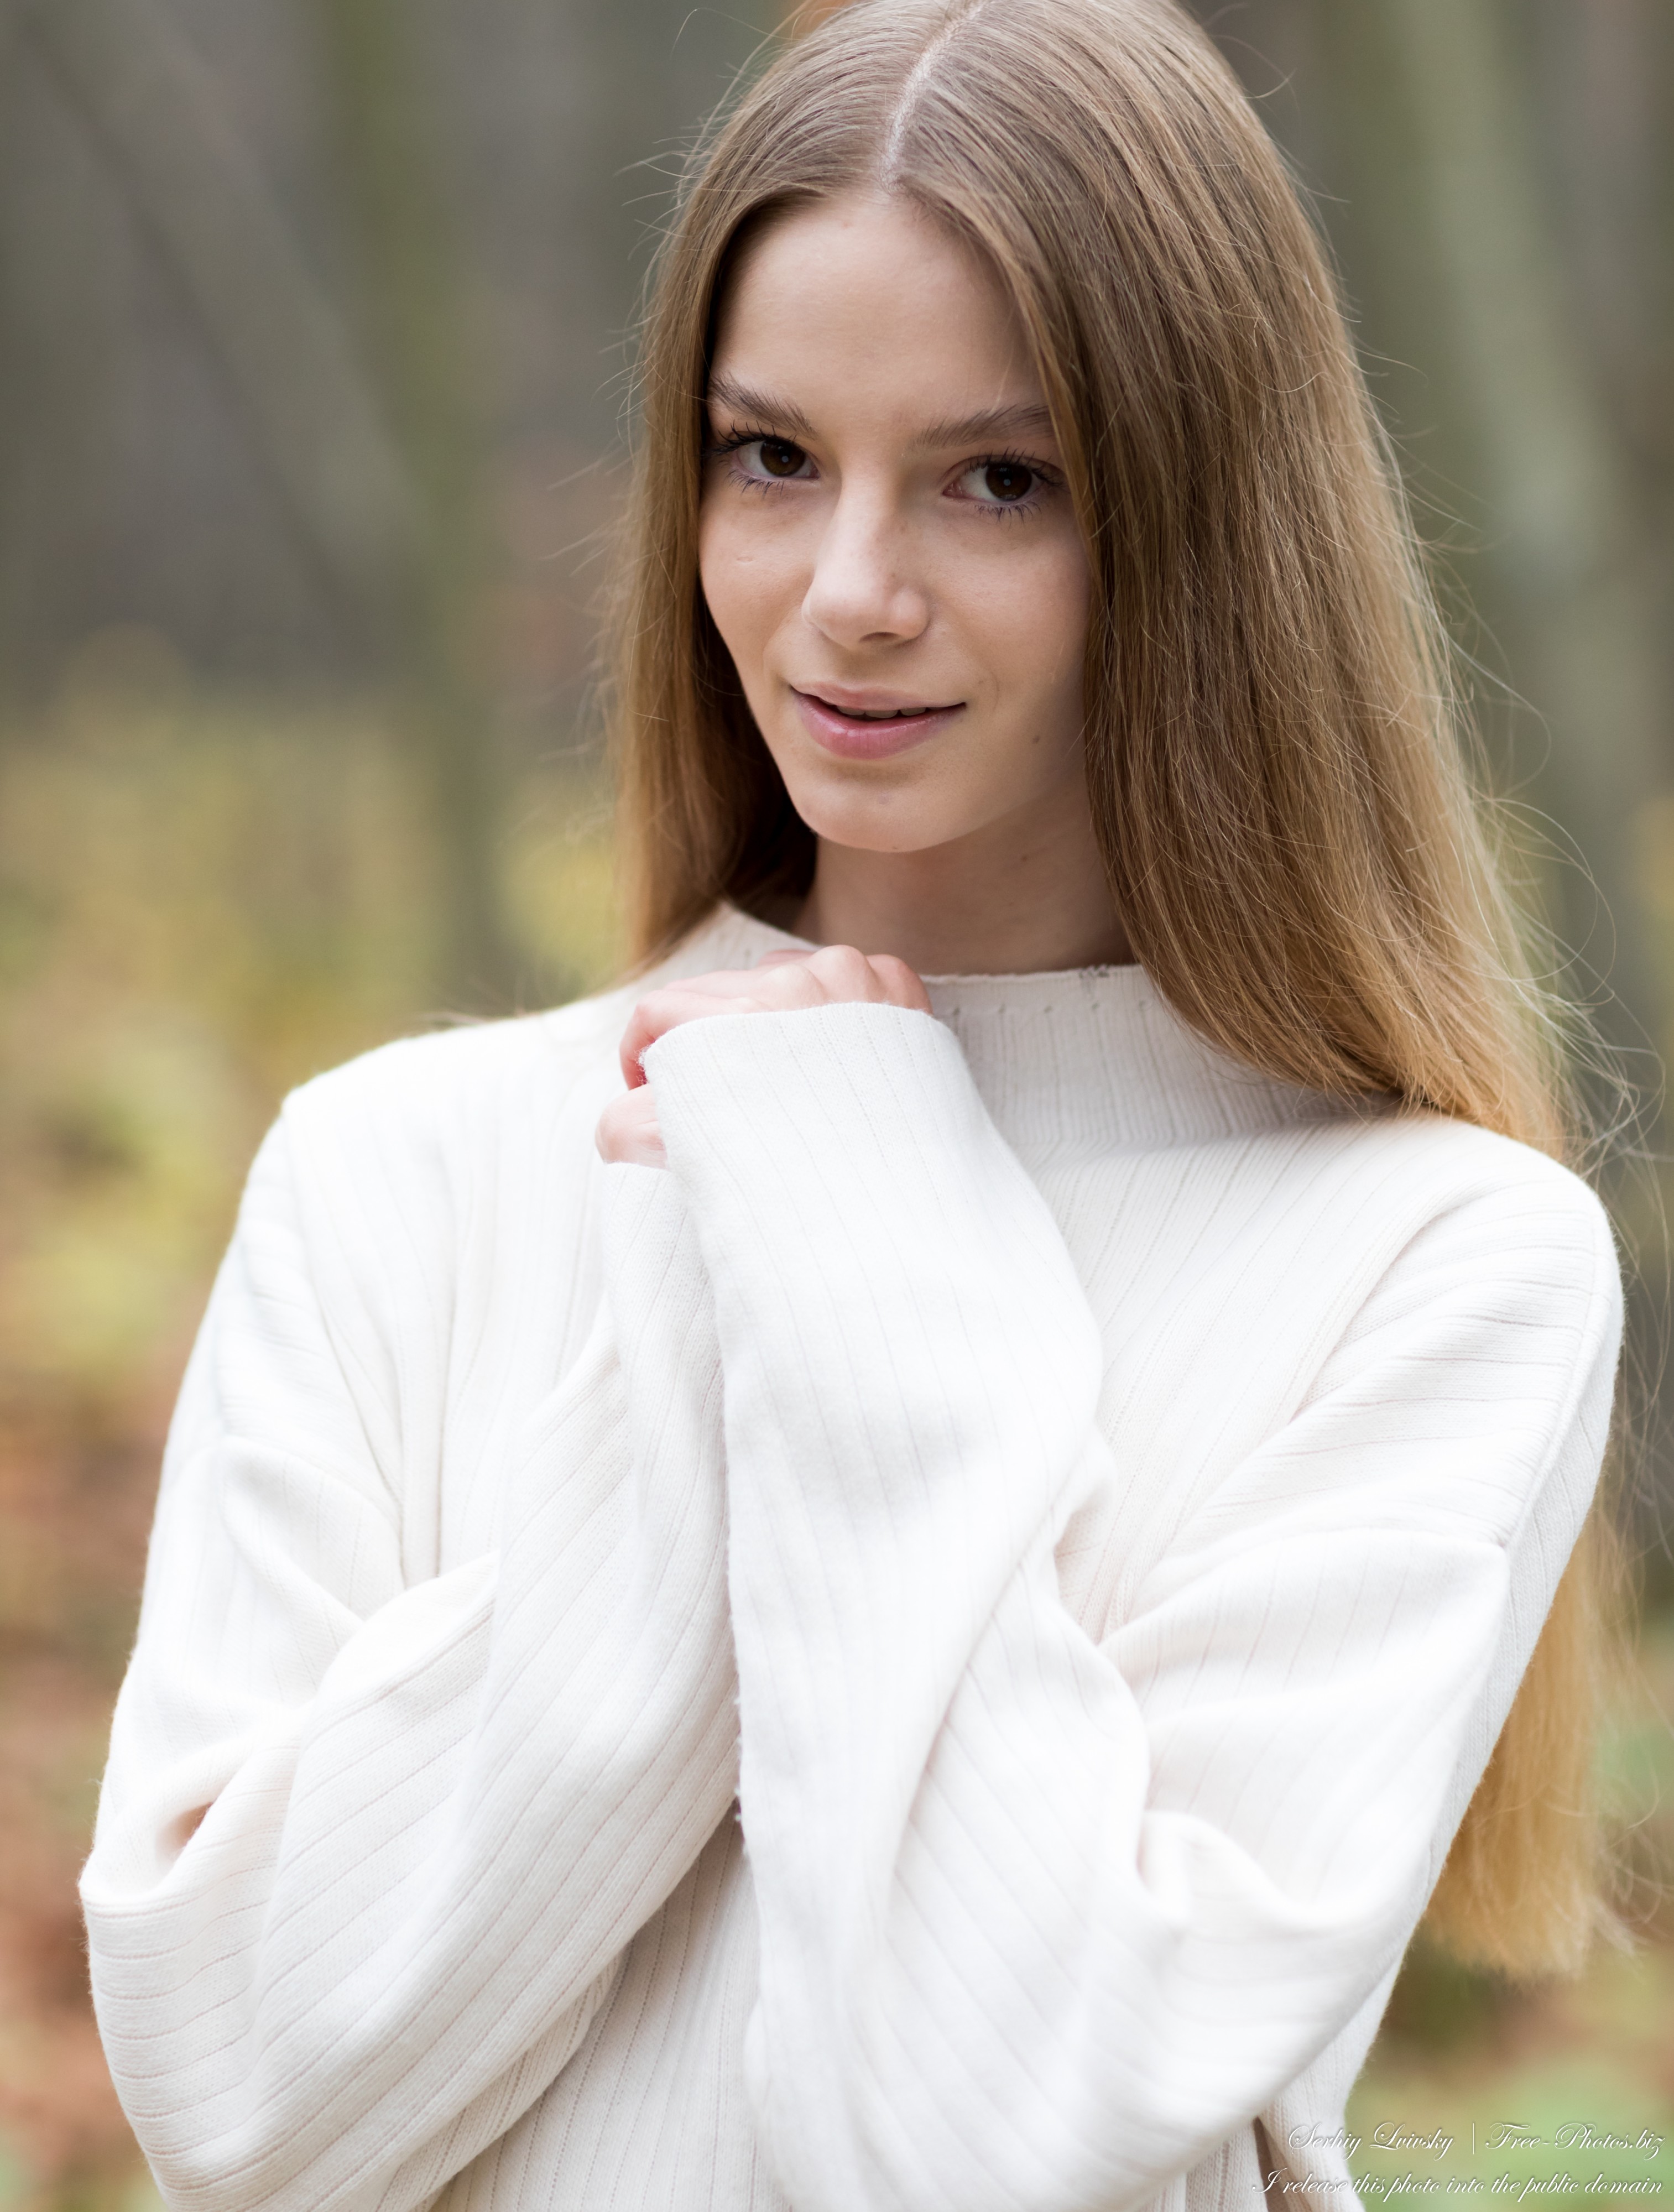 Vika - an 18-year-old God's creation with natural fair hair, photographed by Serhiy Lvivsky in November 2022, picture 29